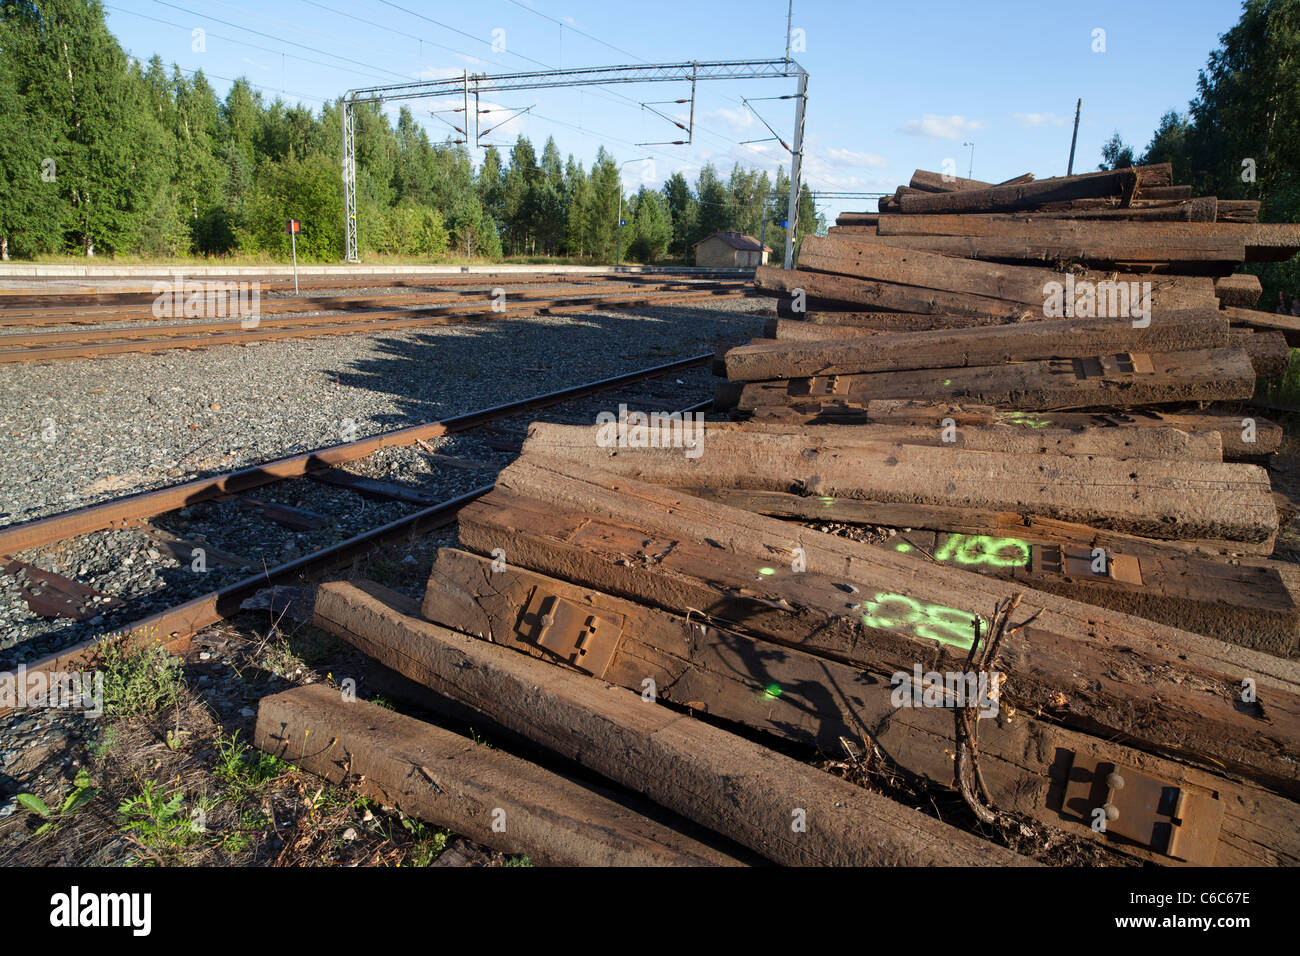 Pile of old wooden decommissioned railroad sleepers waiting for transport , Finland Stock Photo